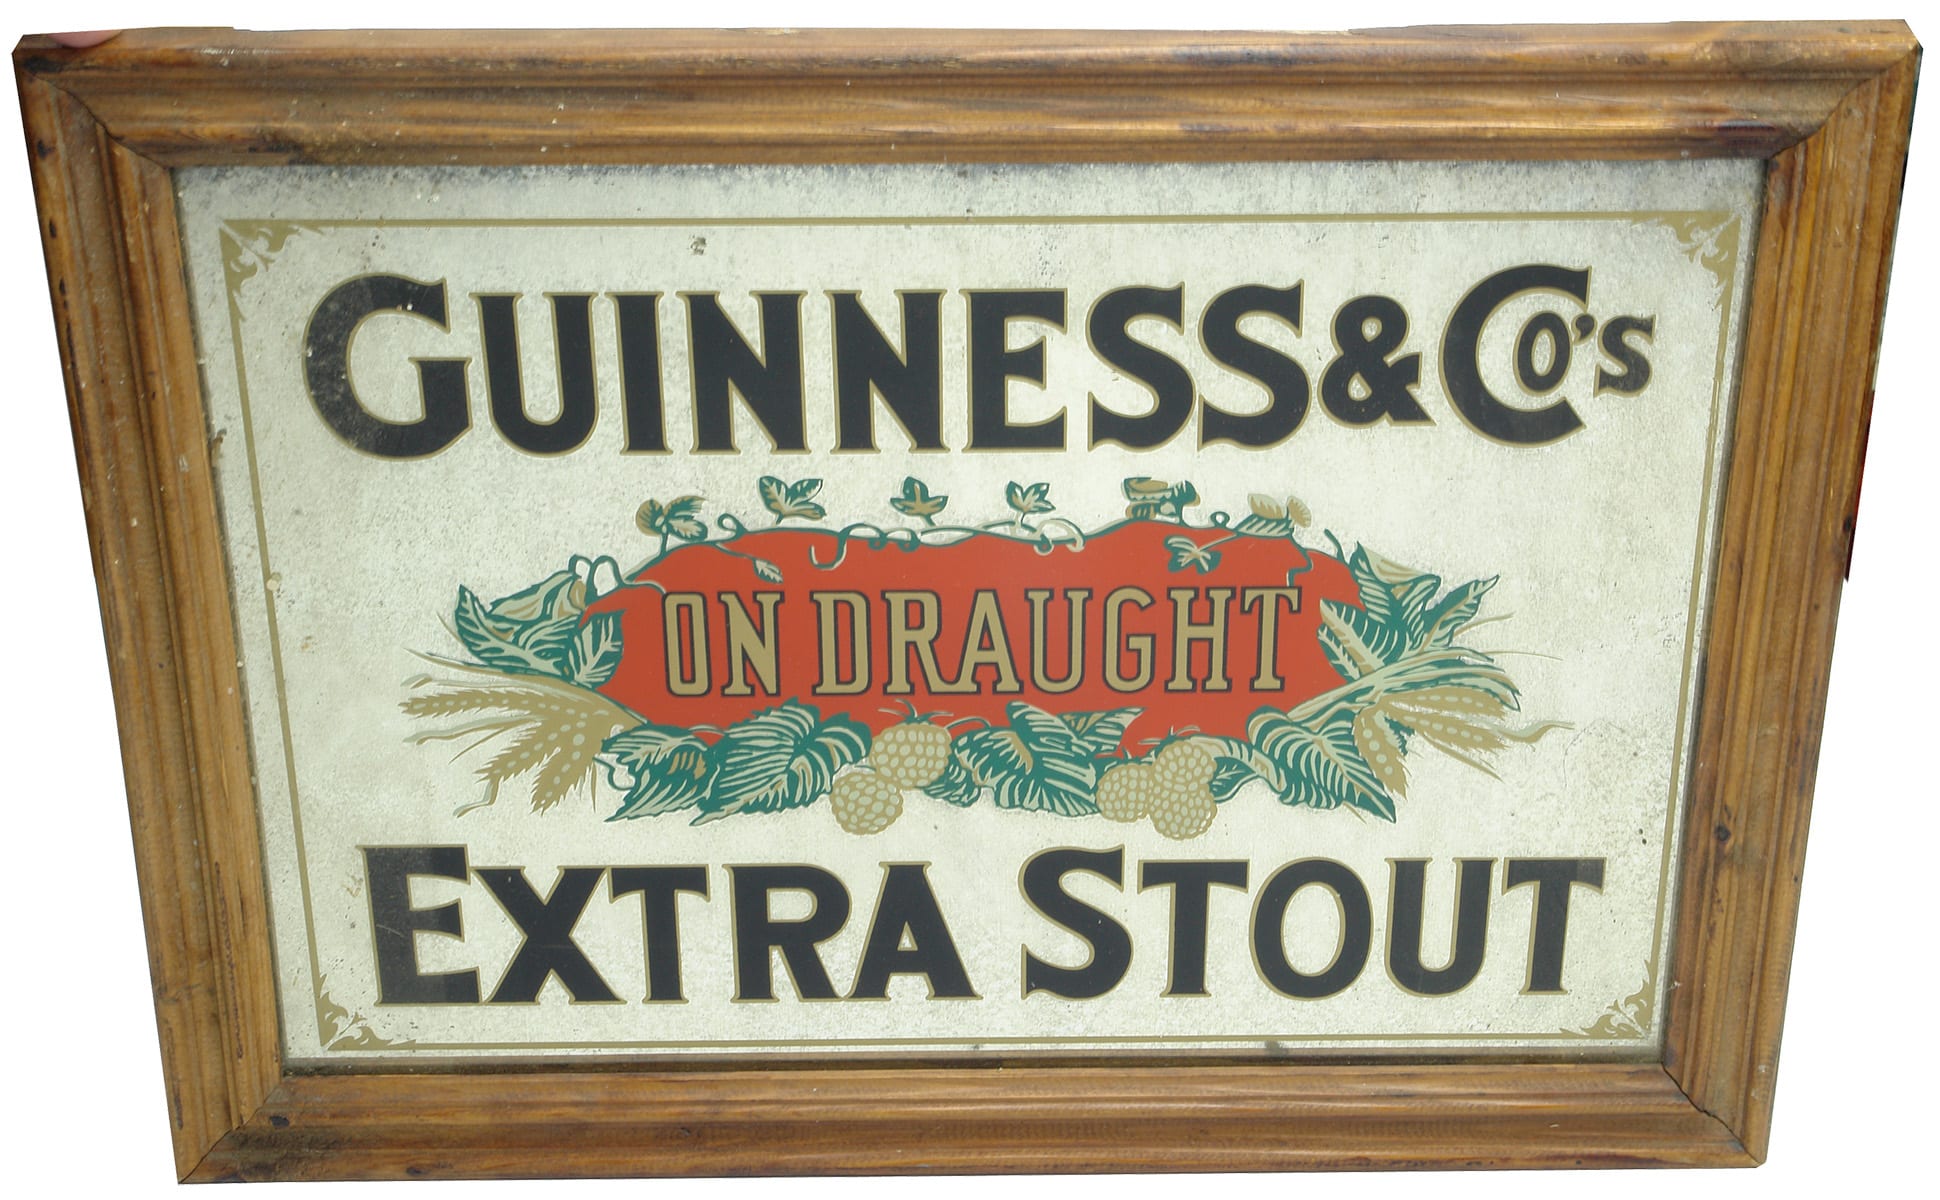 Guinness Extra Stout Advertising Mirror